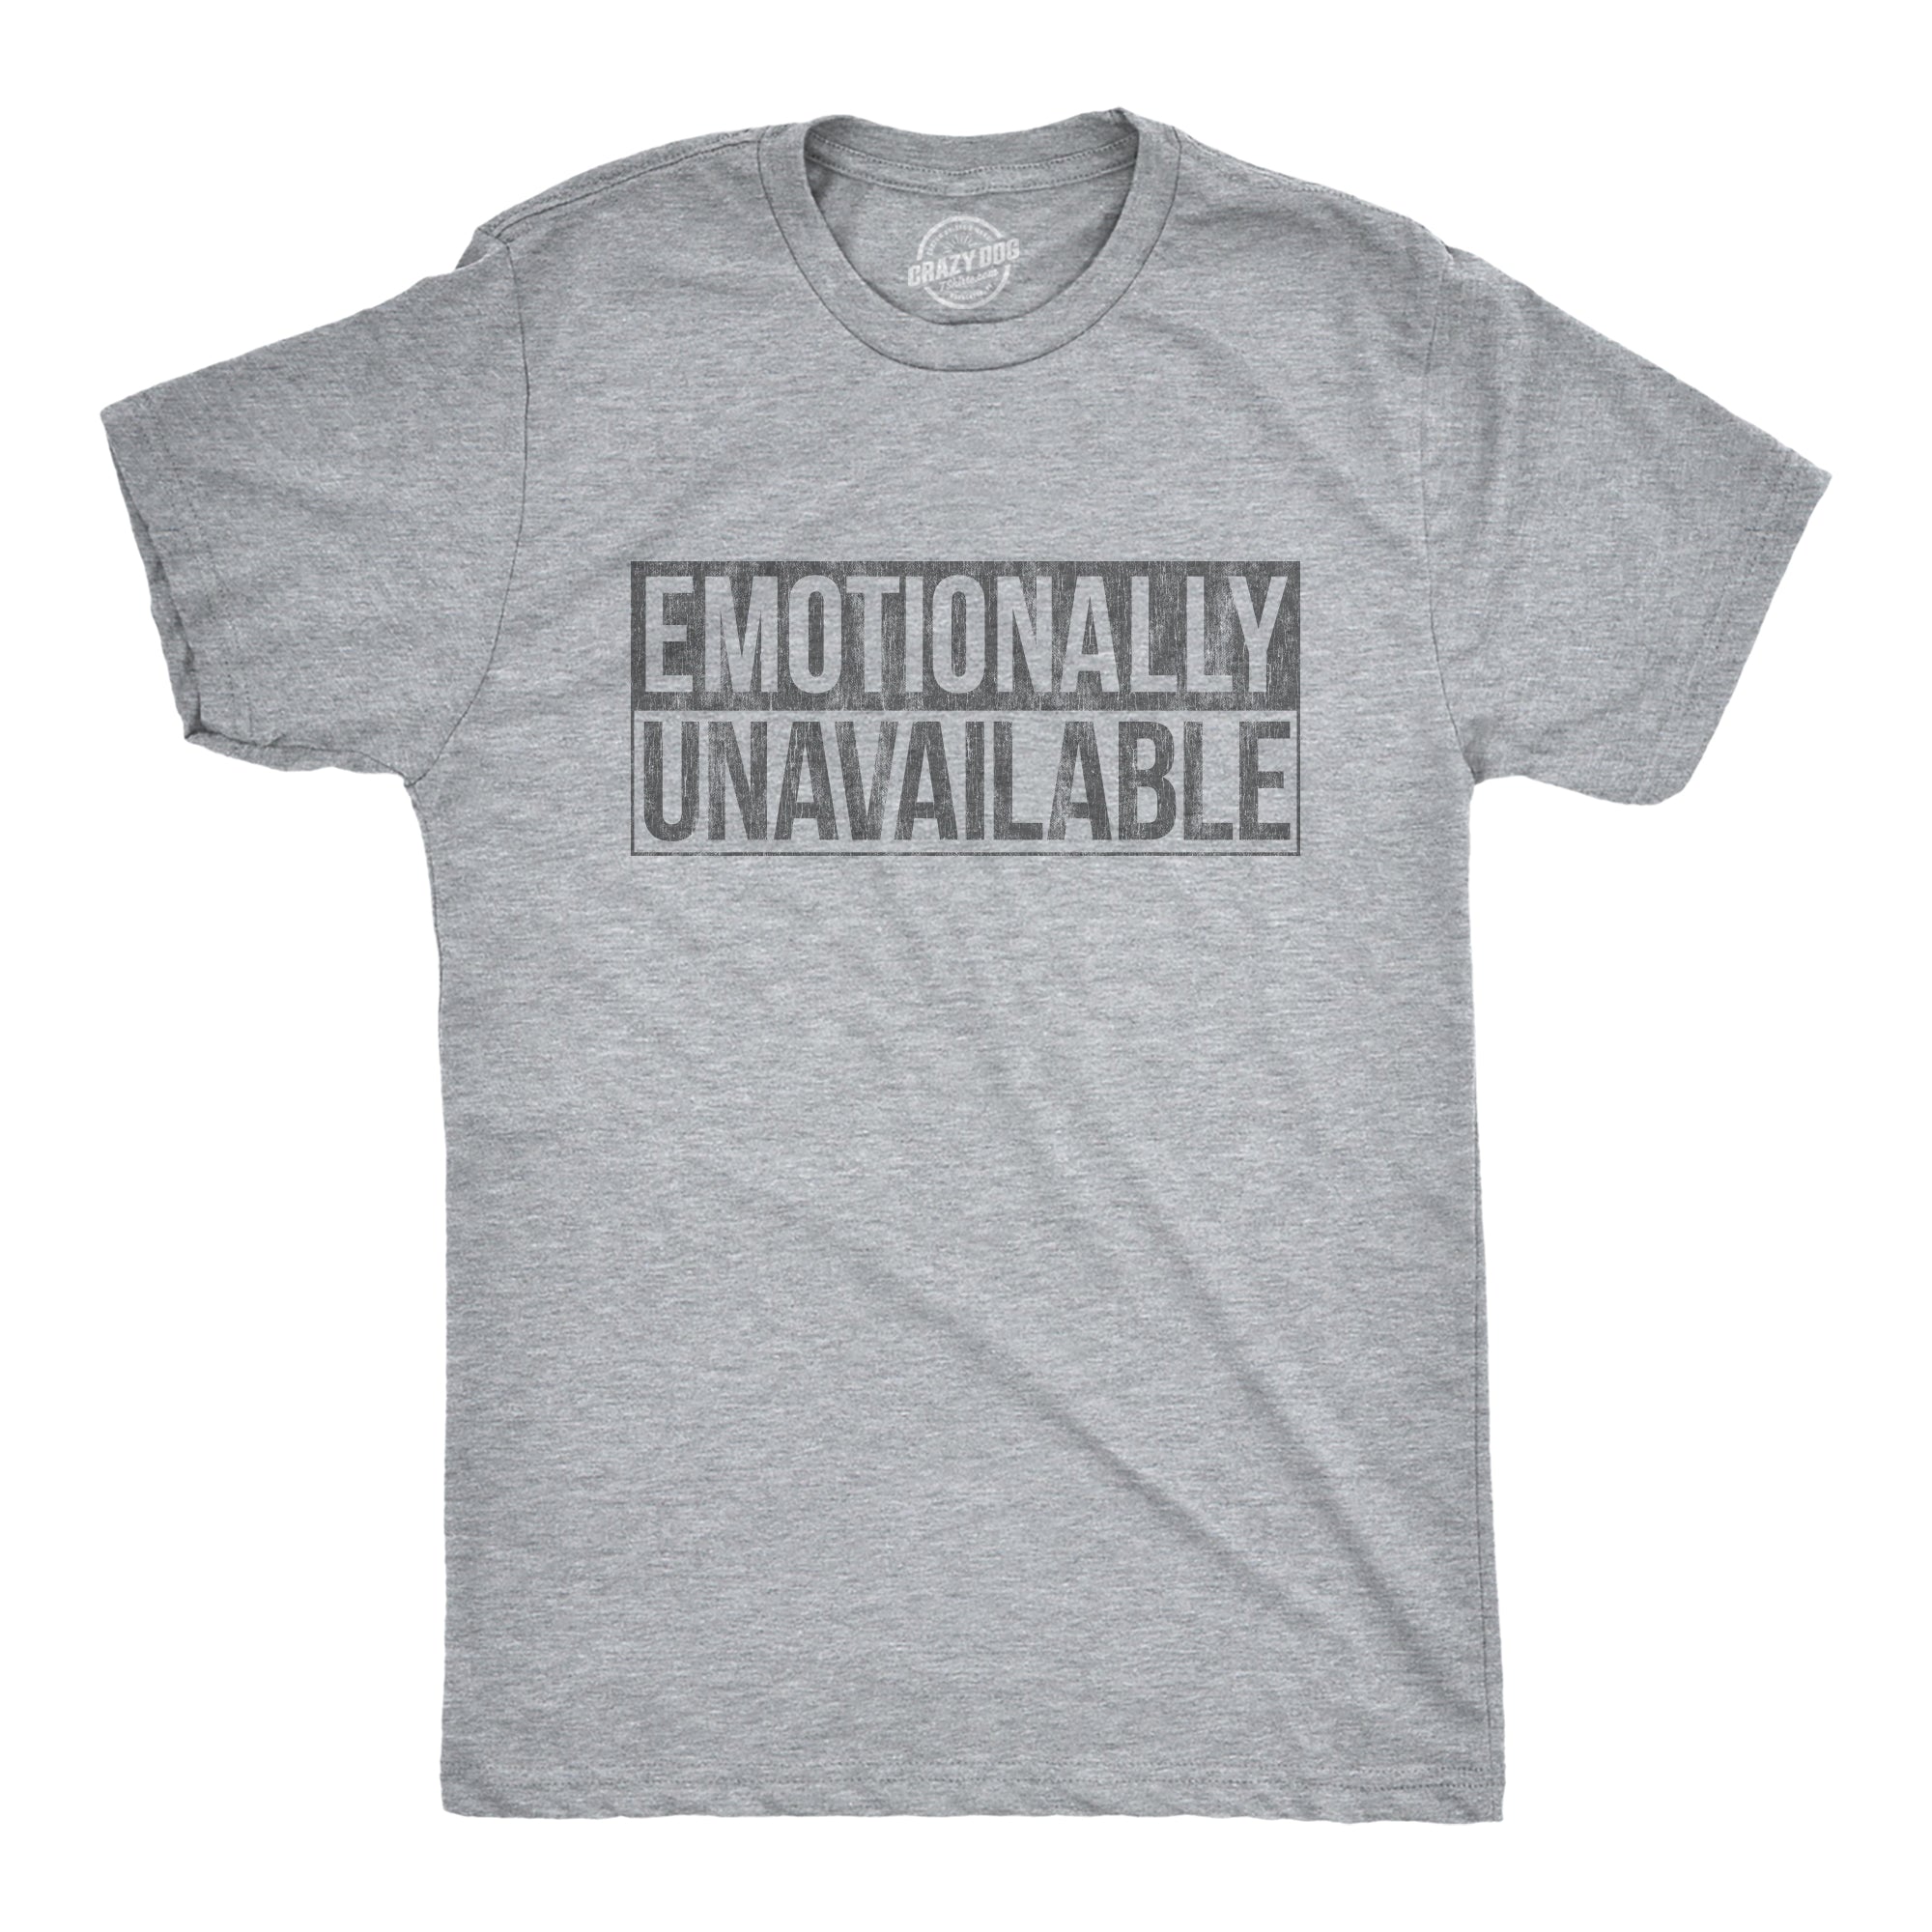 Funny Light Heather Grey Emotionally Unavailable Mens T Shirt Nerdy Introvert Nerdy Tee